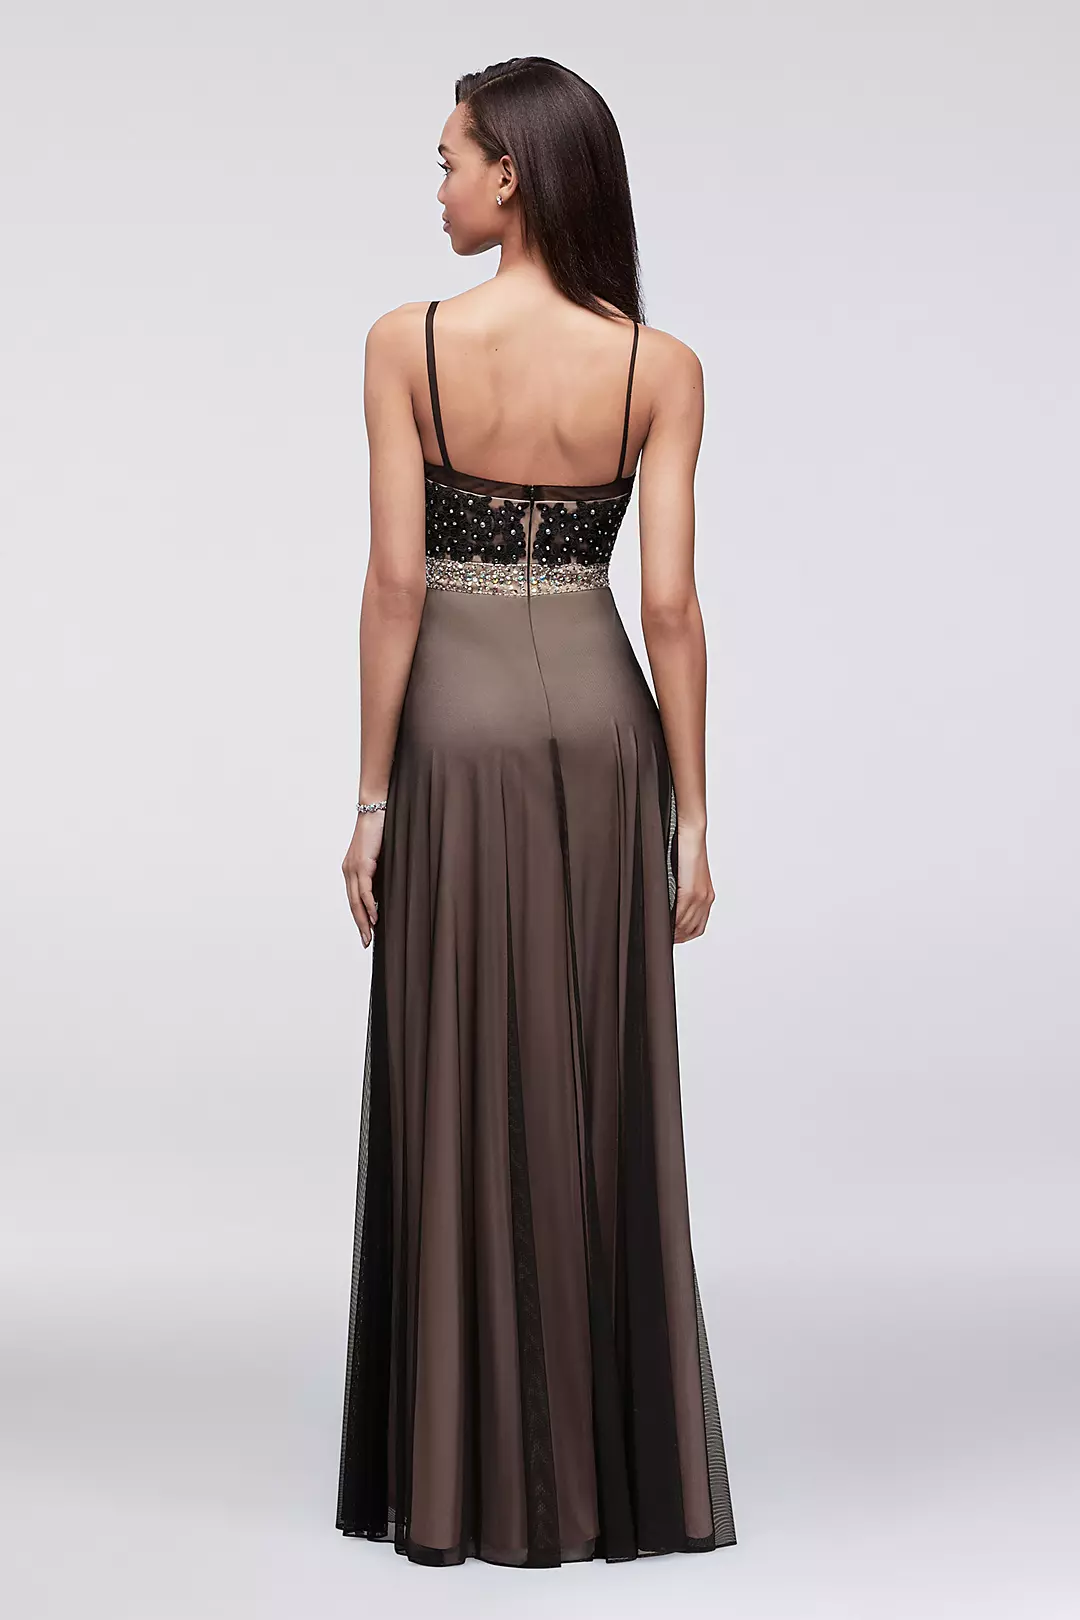 Long Lace and Mesh Dress with Beaded Waistband Image 2